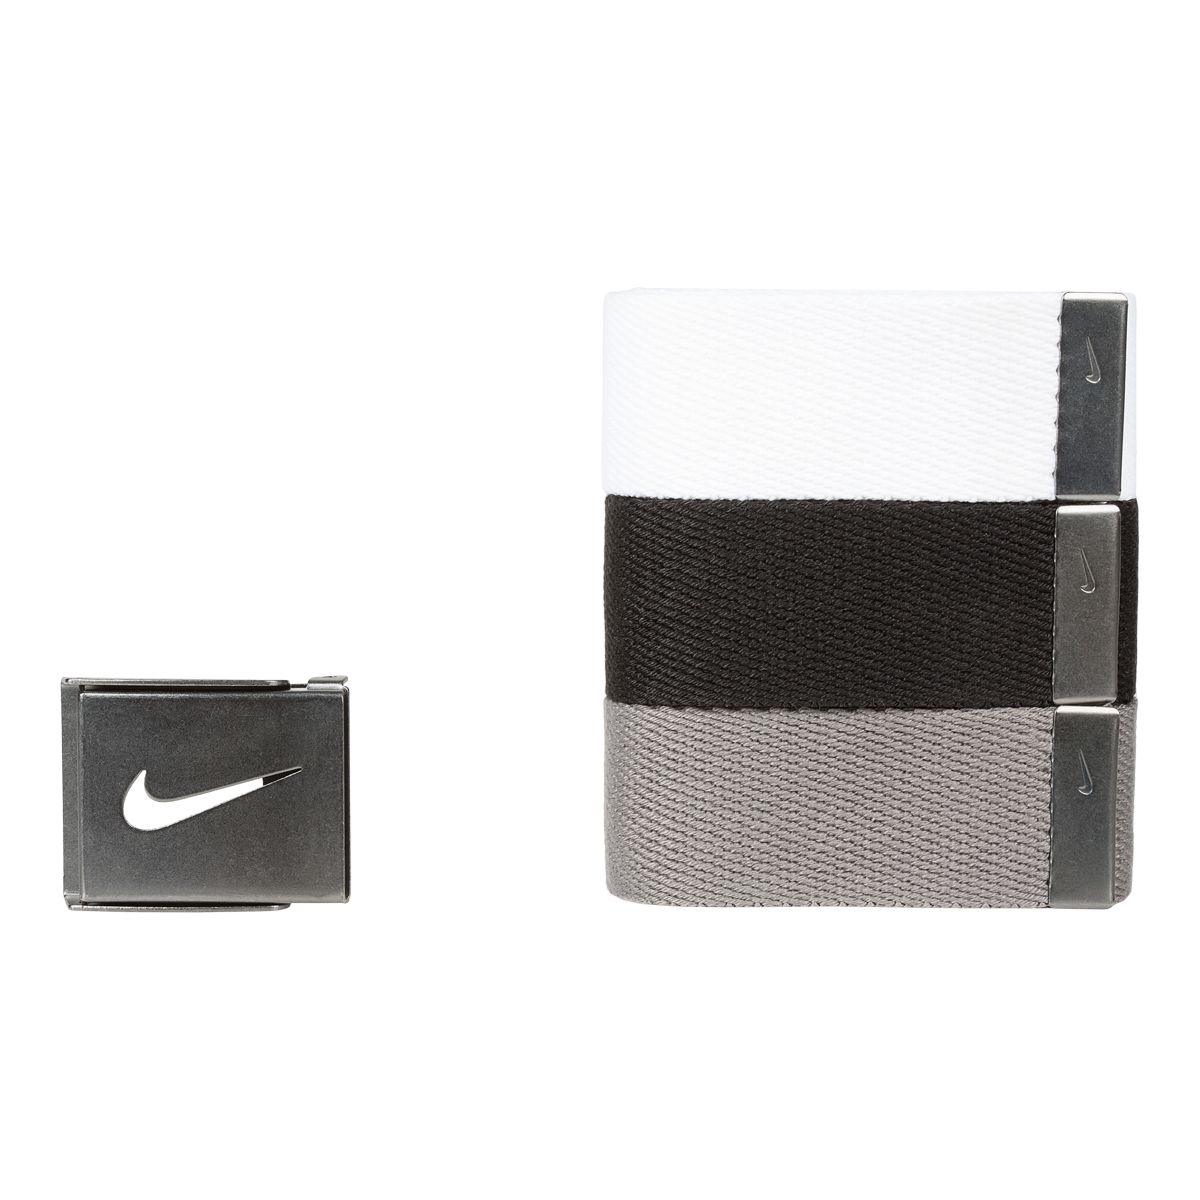 https://media-www.atmosphere.ca/product/div-03-softgoods/dpt-79-clothing-accessories/sdpt-01-mens/333507437/nike-golf-3-pack-web-belt-bl-blk-wht-gry-ns--311a43c1-34f2-4404-b10c-0b8b236f8872-jpgrendition.jpg